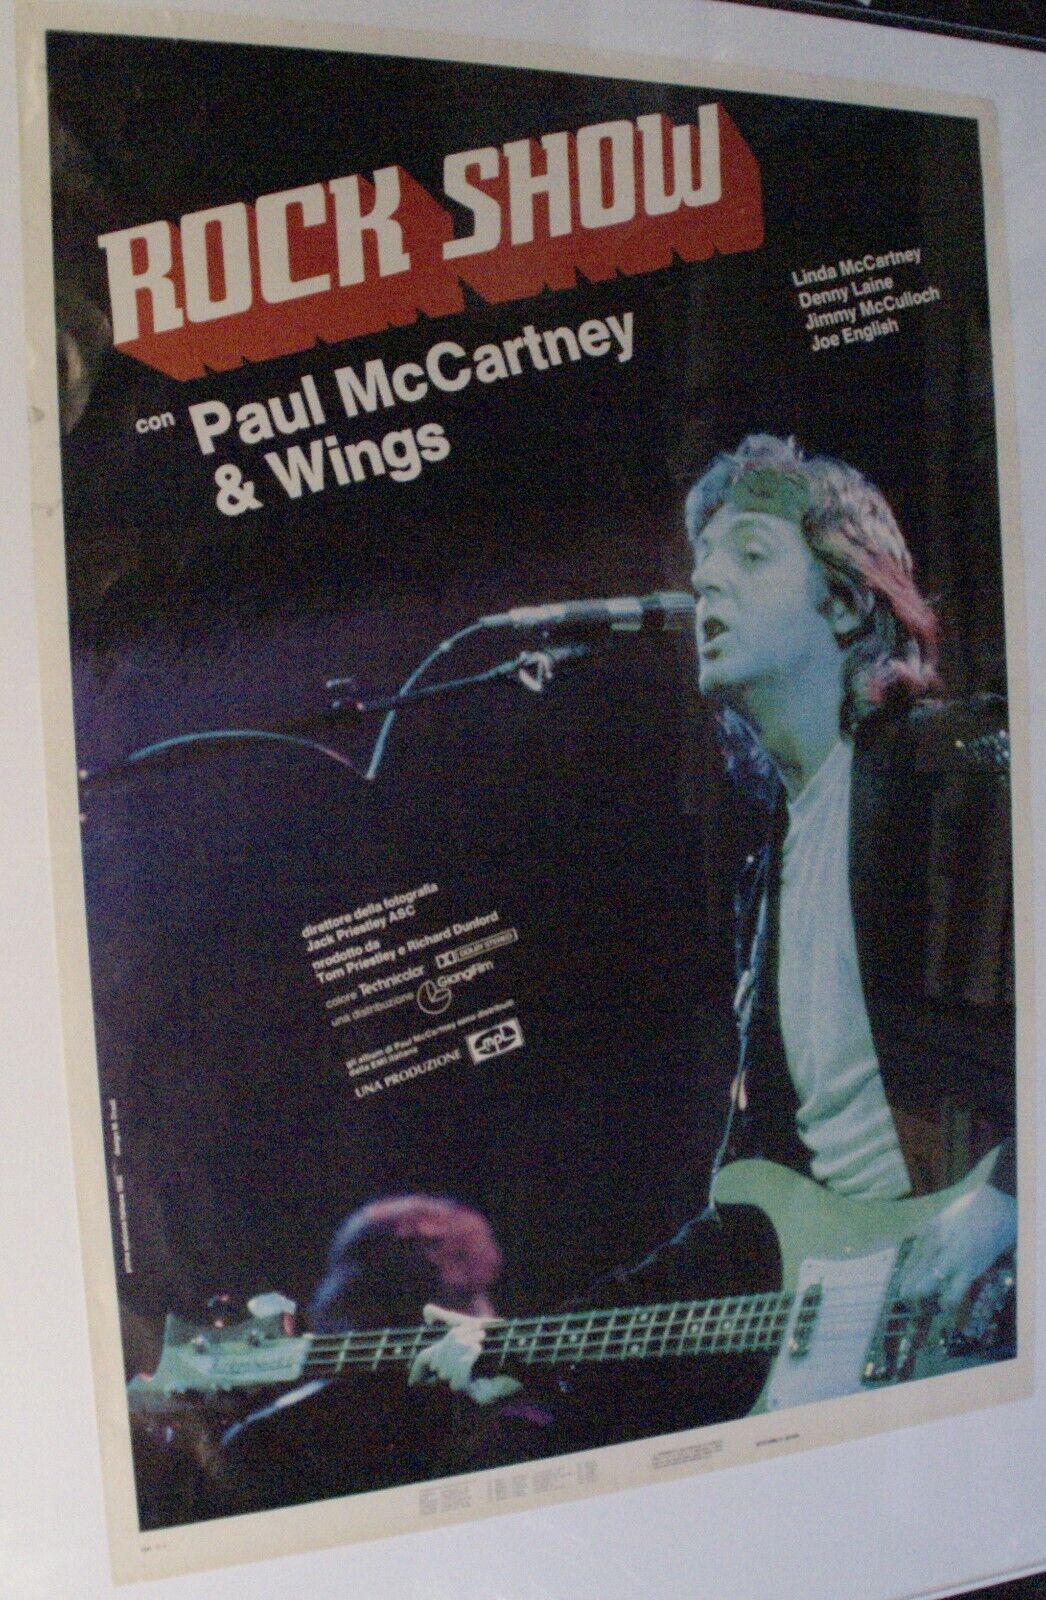 The Beatles Paul McCartney and Wings Poster Vintage Italian Rock Show 1980